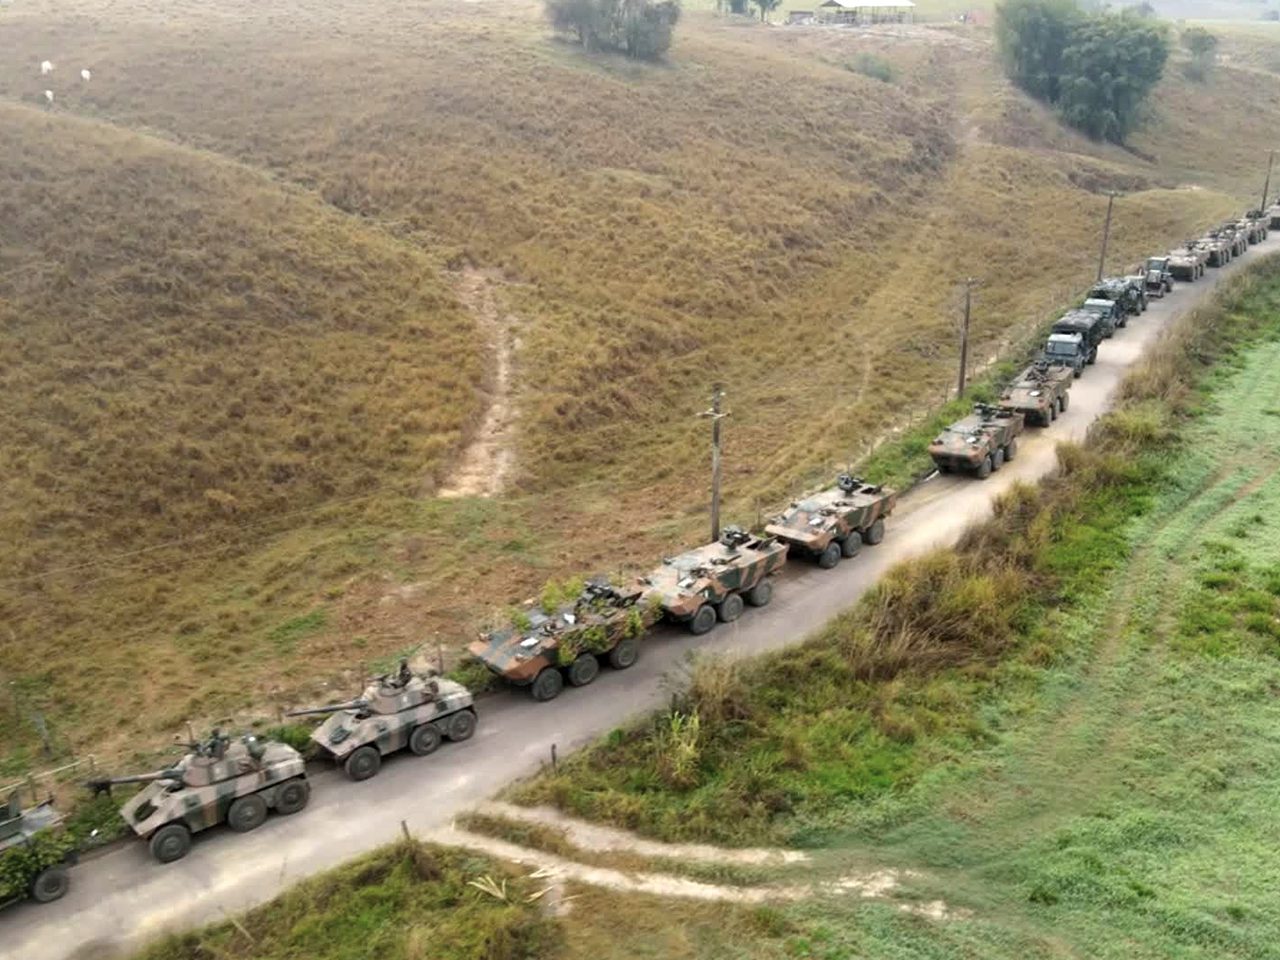 More than a thousand soldiers are employed in the training of Infantry Brigade as a Readiness Force of the Brazilian army